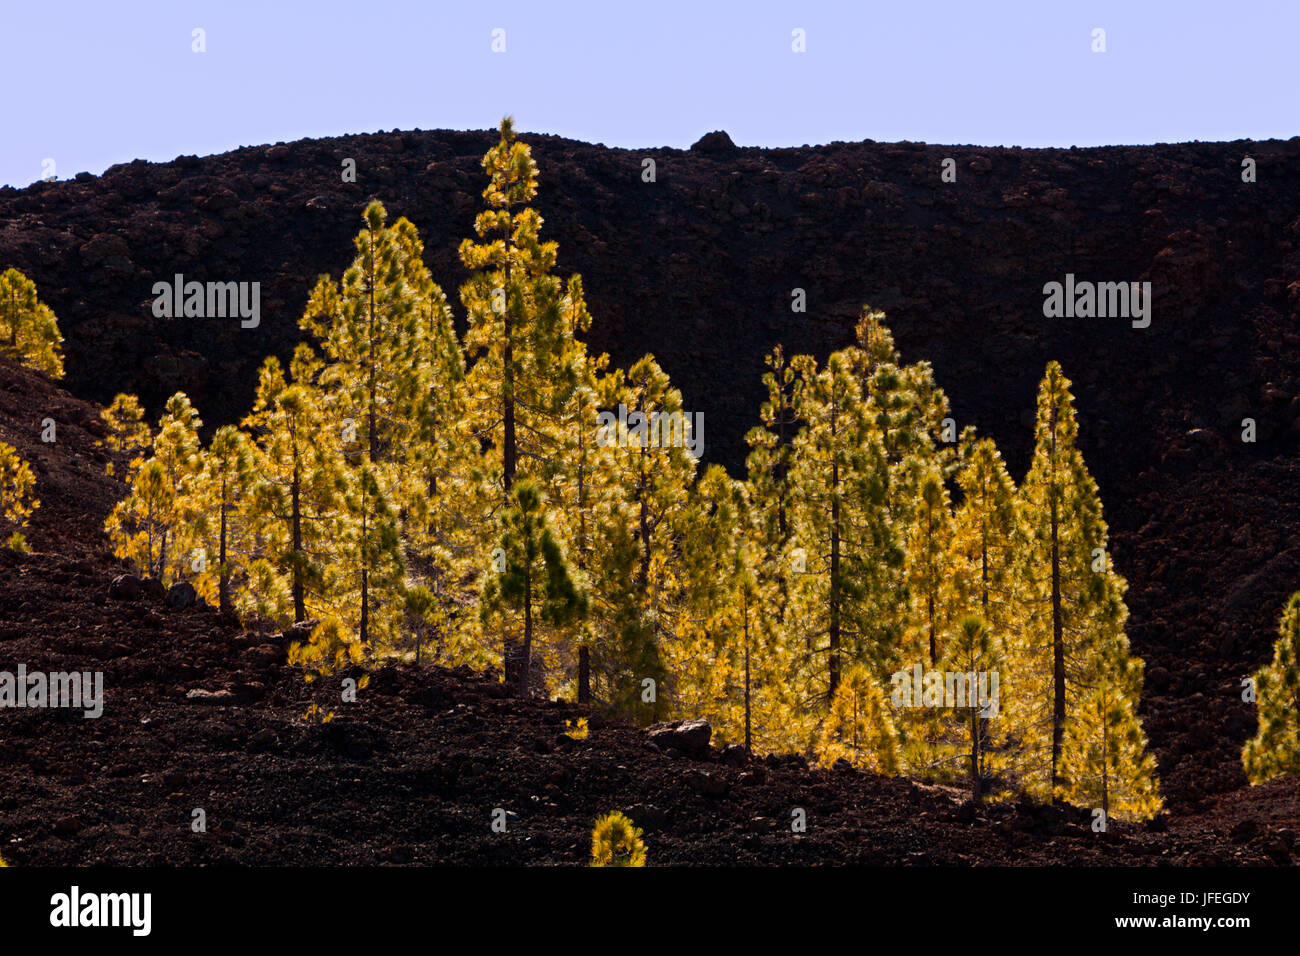 Canaries pines in the Teide national park, Pinus canariensis, Tenerife, Spain Stock Photo